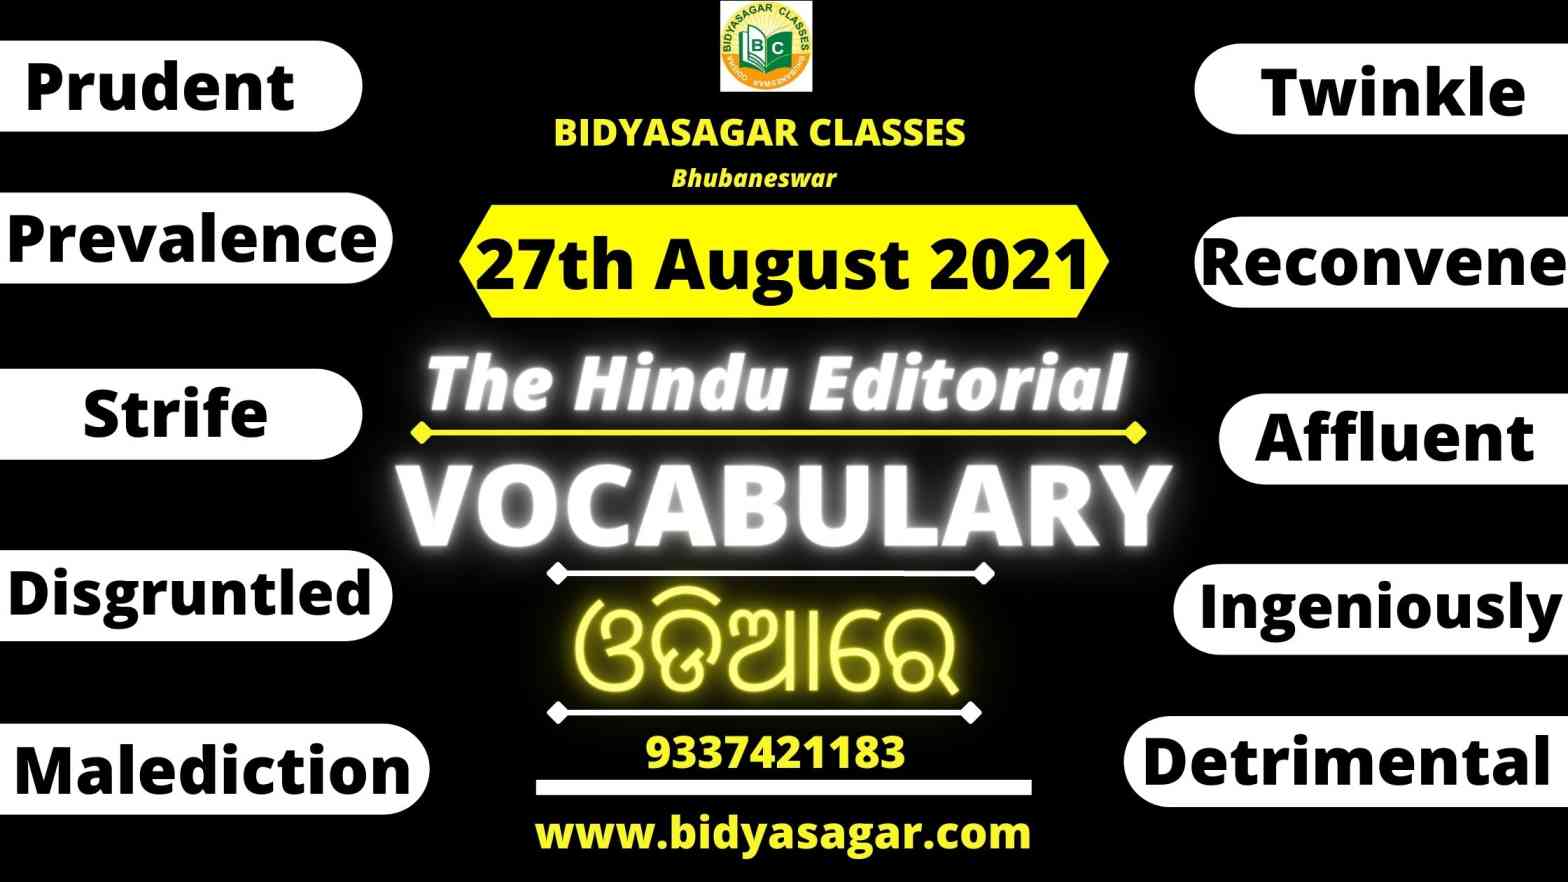 The Hindu Editorial Vocabulary of 27th August 2021